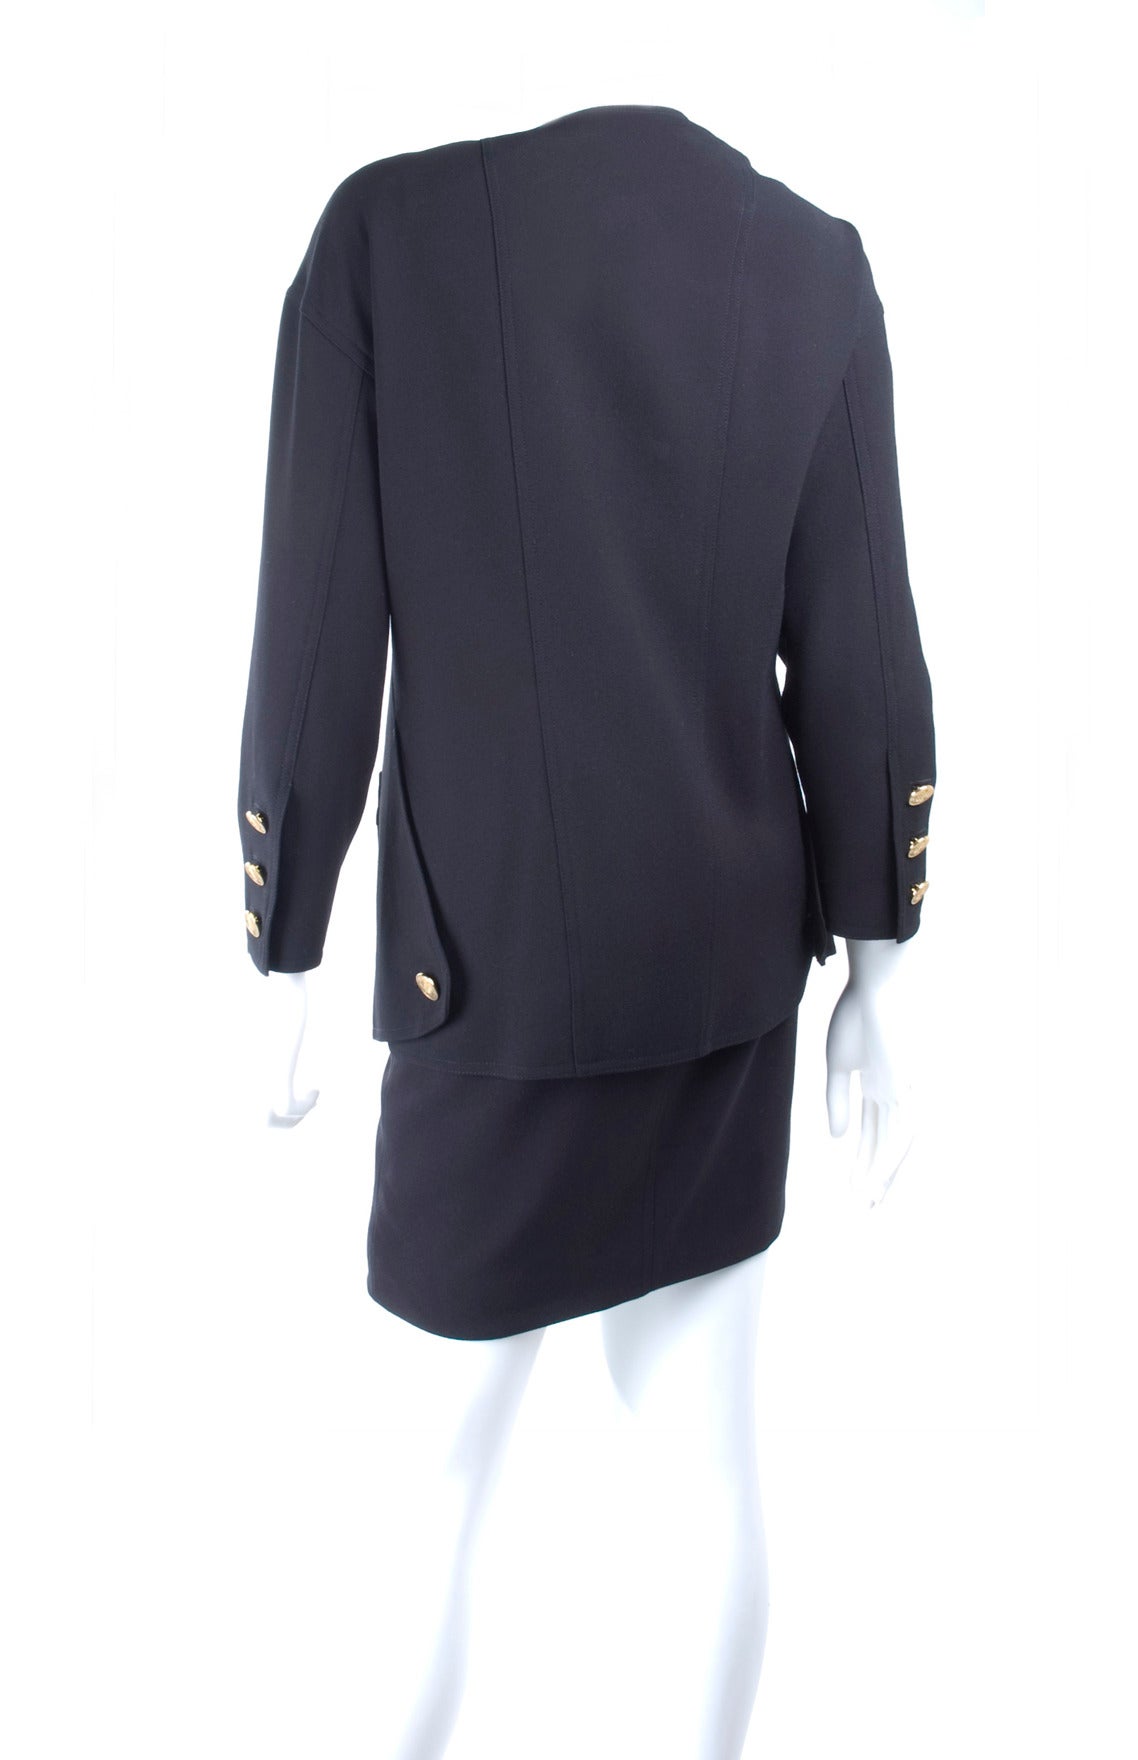 Vintage 1980s Chanel Suit Black with Gold Buttons In Excellent Condition For Sale In Hamburg, Deutschland